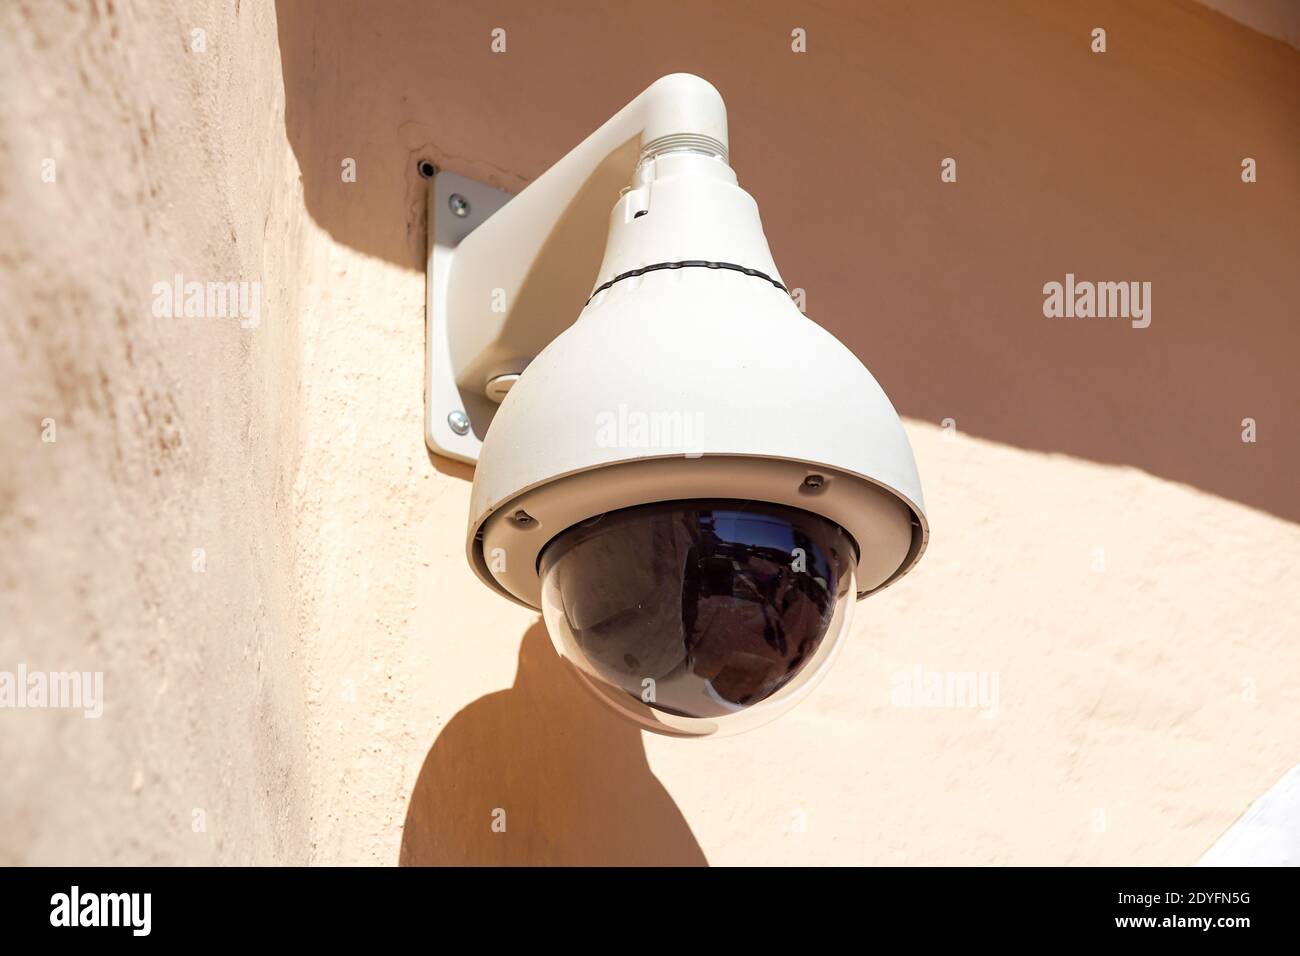 High tech overhead security camera at a government owned building. Stock Photo